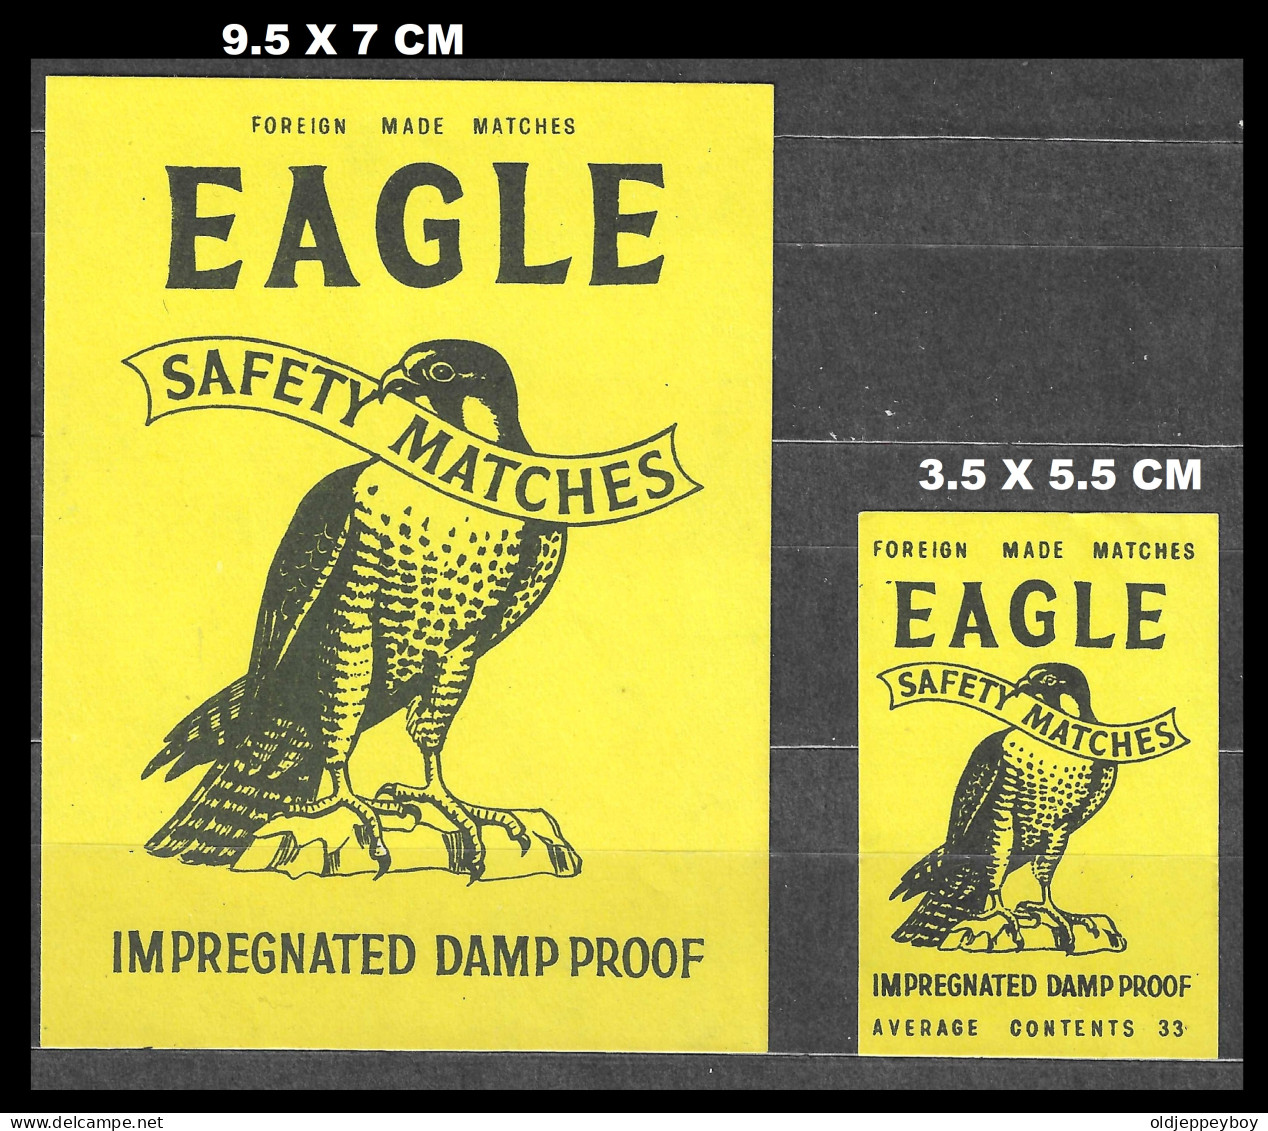  MATCHBOX LABEL "EAGLE" FOREIGN MADE DAMP PROOF  SET OF 2 DIF SIZES SEE SCAN FOR SIZES  LARGE RARE - Zündholzschachteletiketten